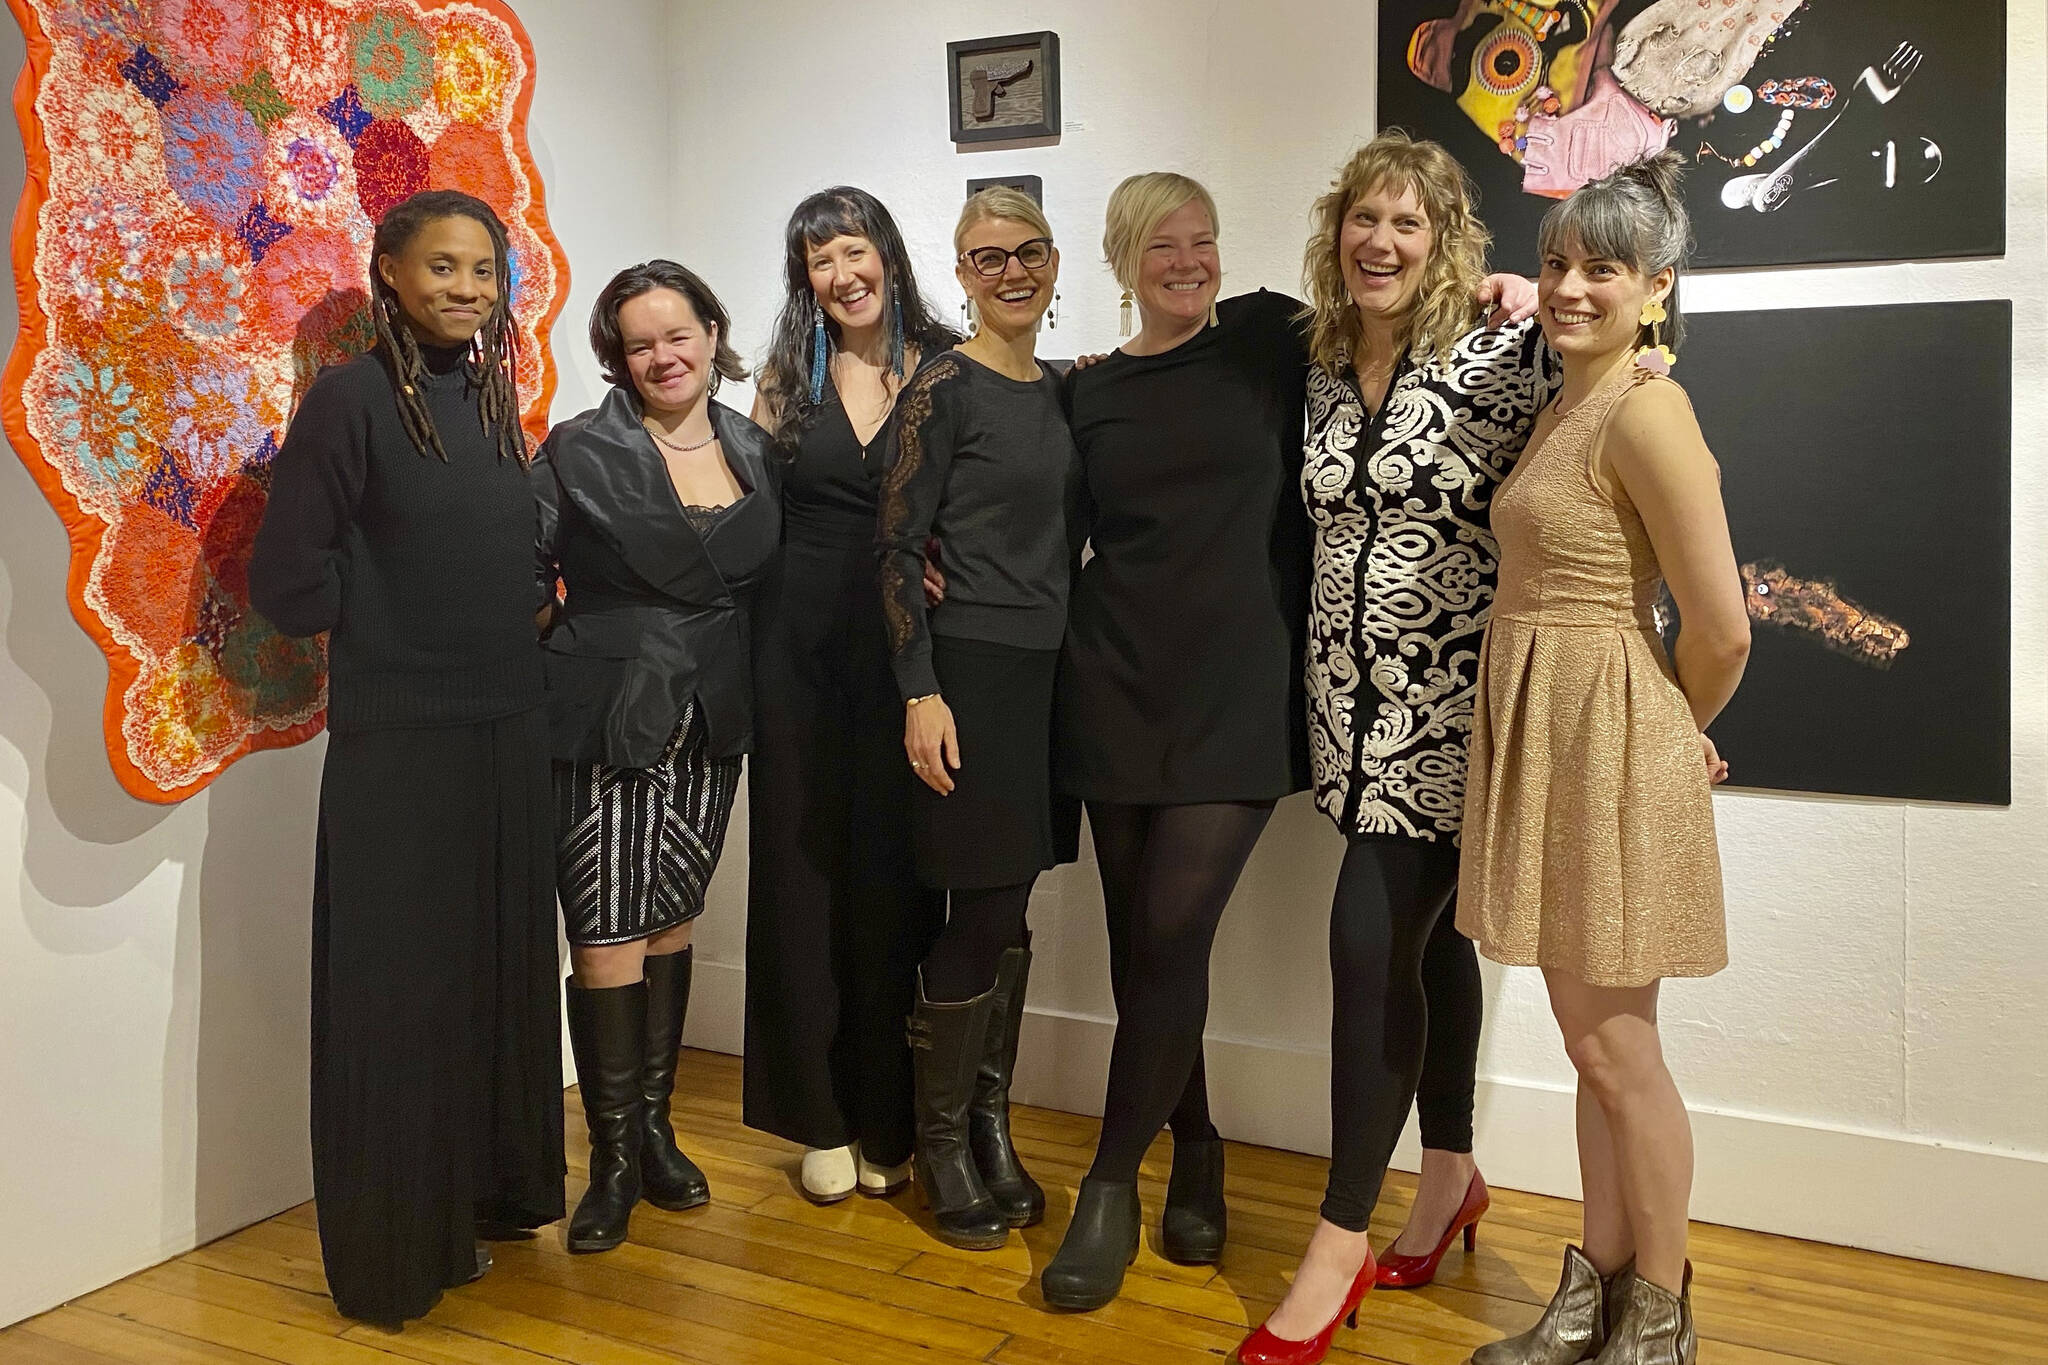 The artists who created the Mother exhibit pose for a group photo on Friday, Dec. 2, 2022, at Bunnell Street Arts Center in Homer. From left to right are Myesha Callahan Freet, Lily Wooshkindein Da.Aat Hope, Brianna Allen, Amy Meissner, Somer Hahm, Amy Komar and Carla Kilnker Cope. (Photo by Adele Person.)